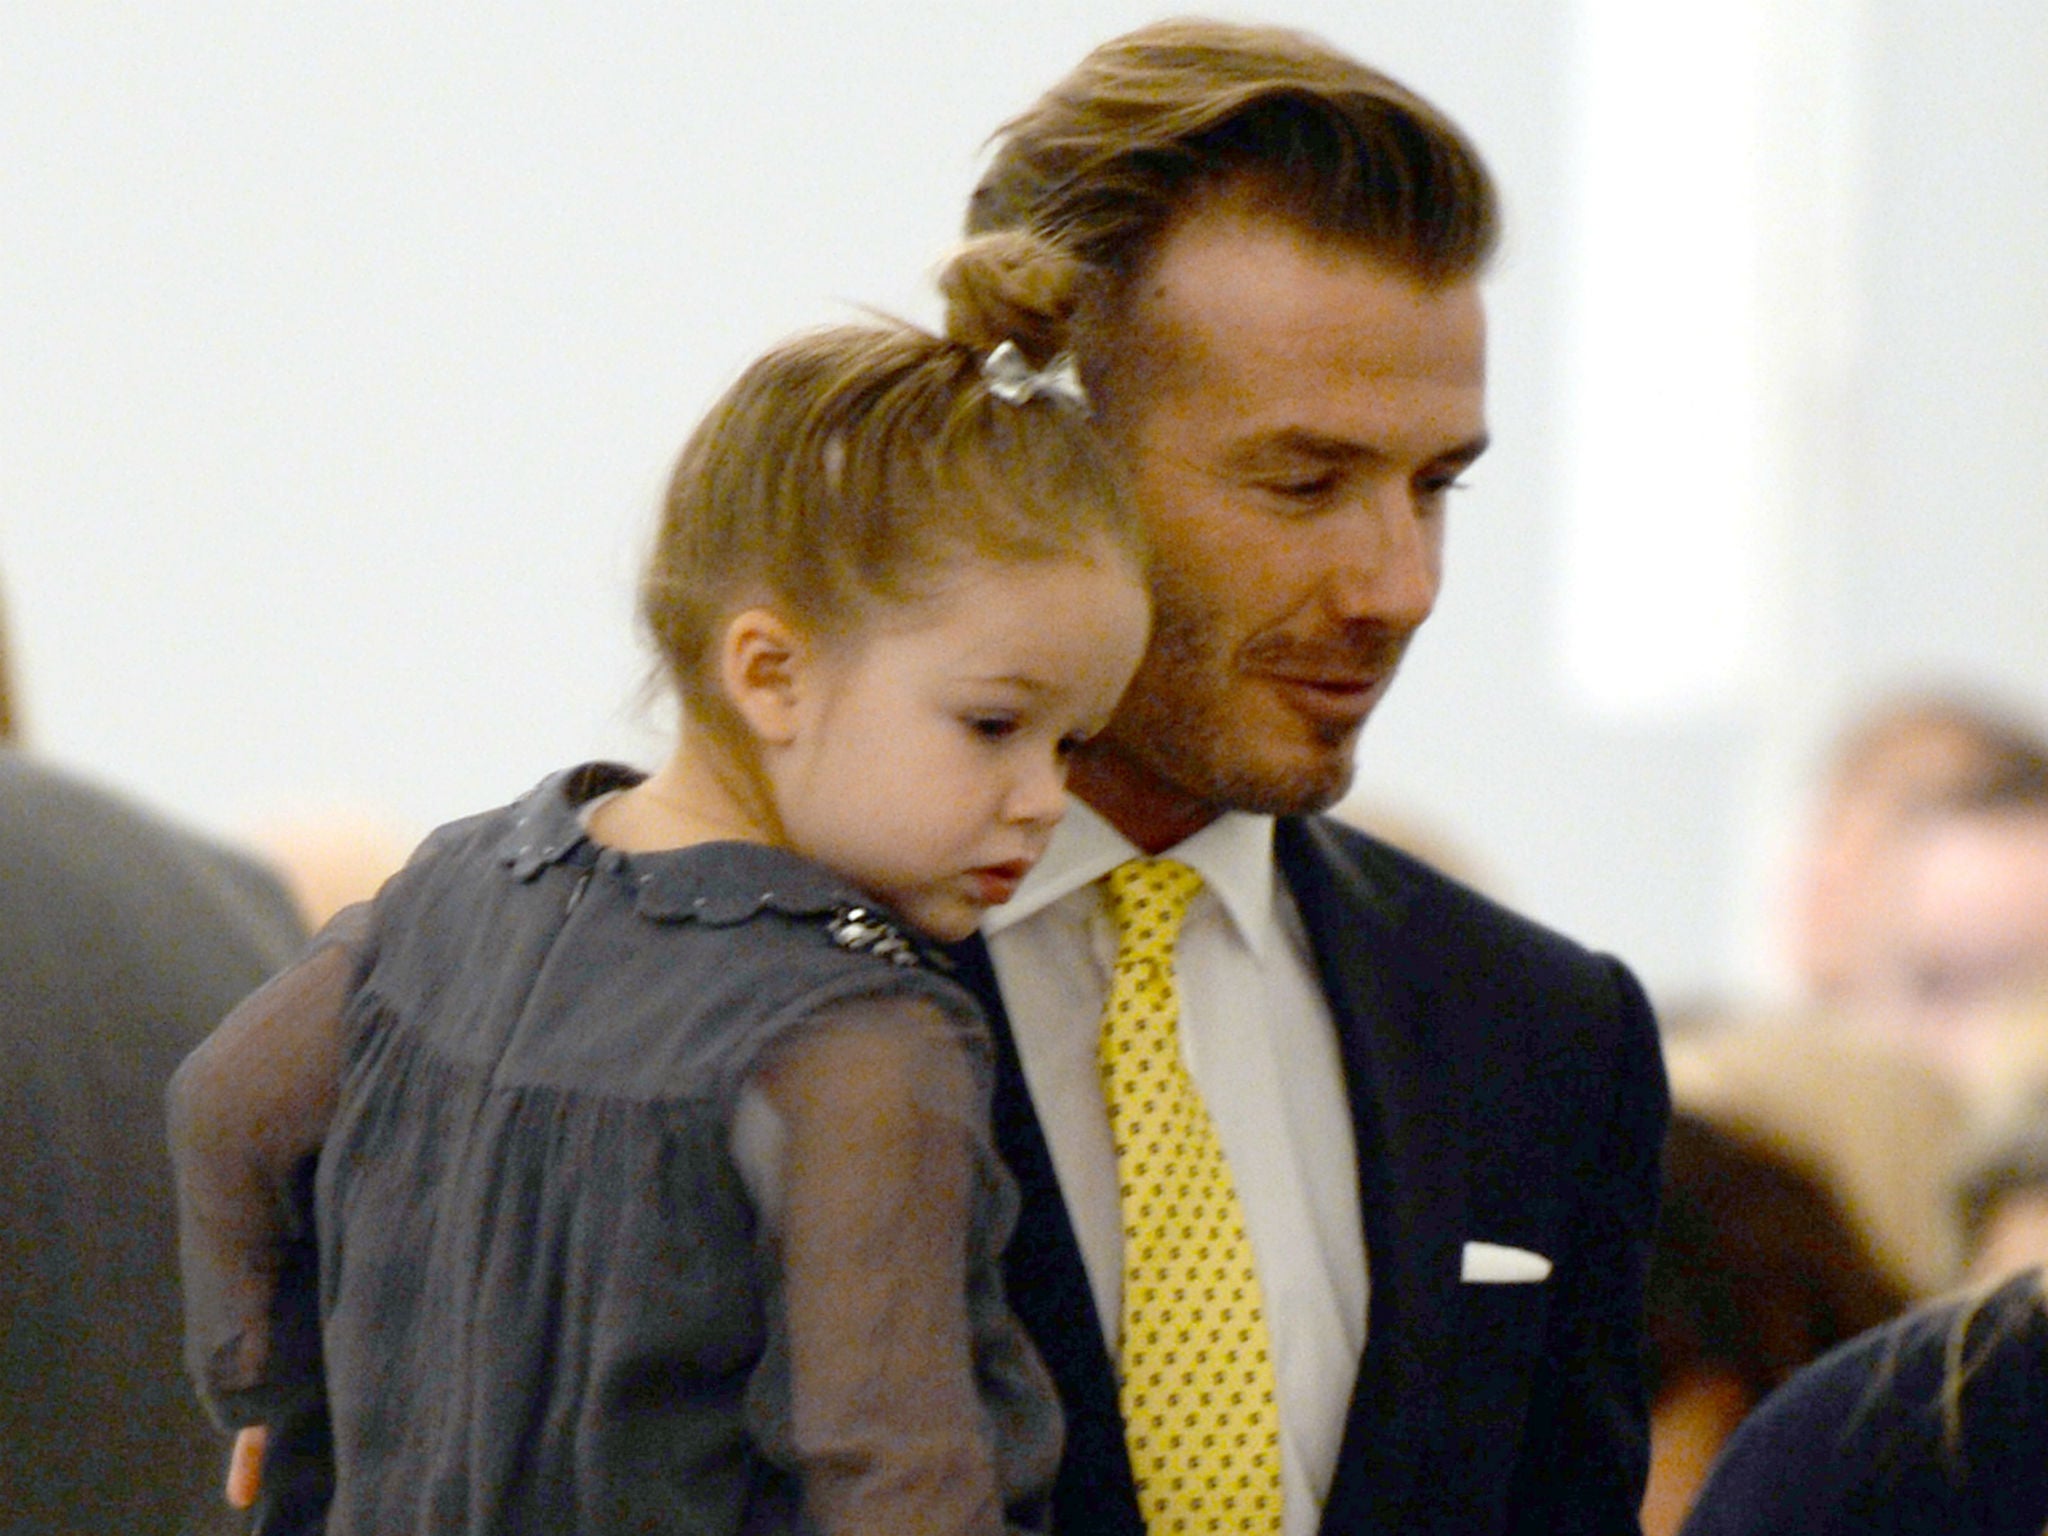 David Beckham responds to an article questioning his use of a dummy